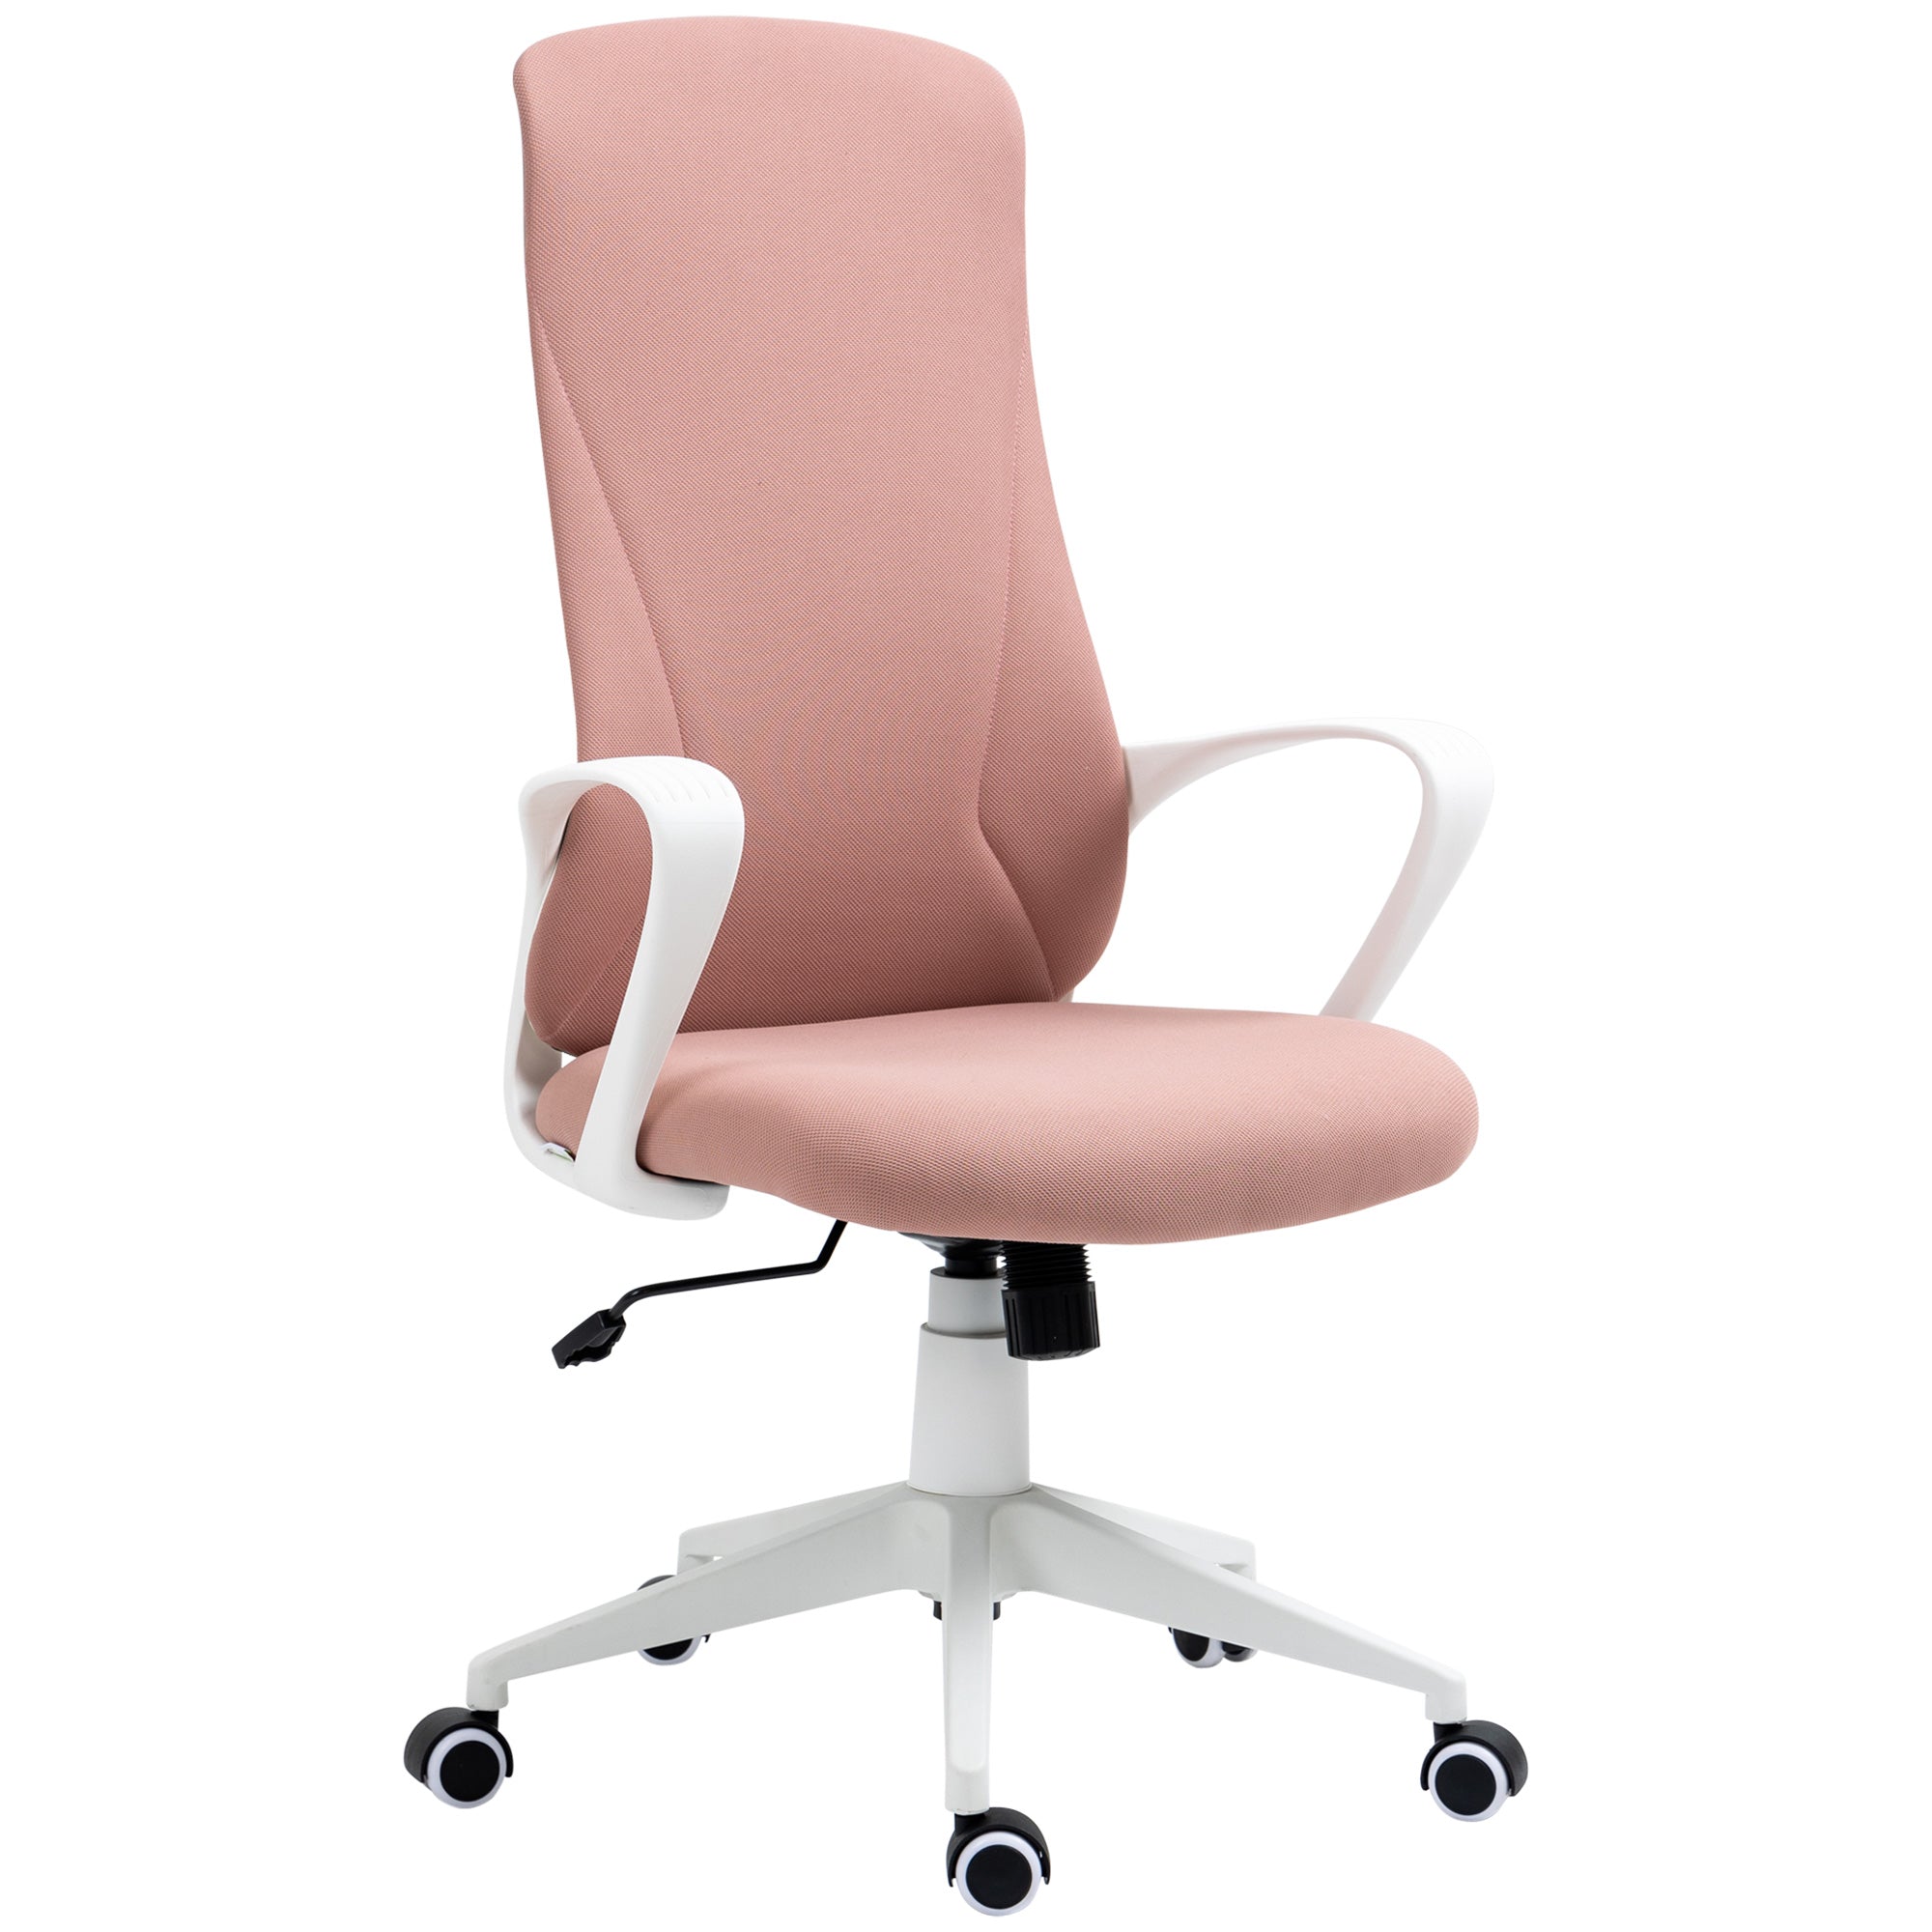 Vinsetto High-Back Home Office Chair Height Adjustable Elastic Desk Chair Pink  | TJ Hughes